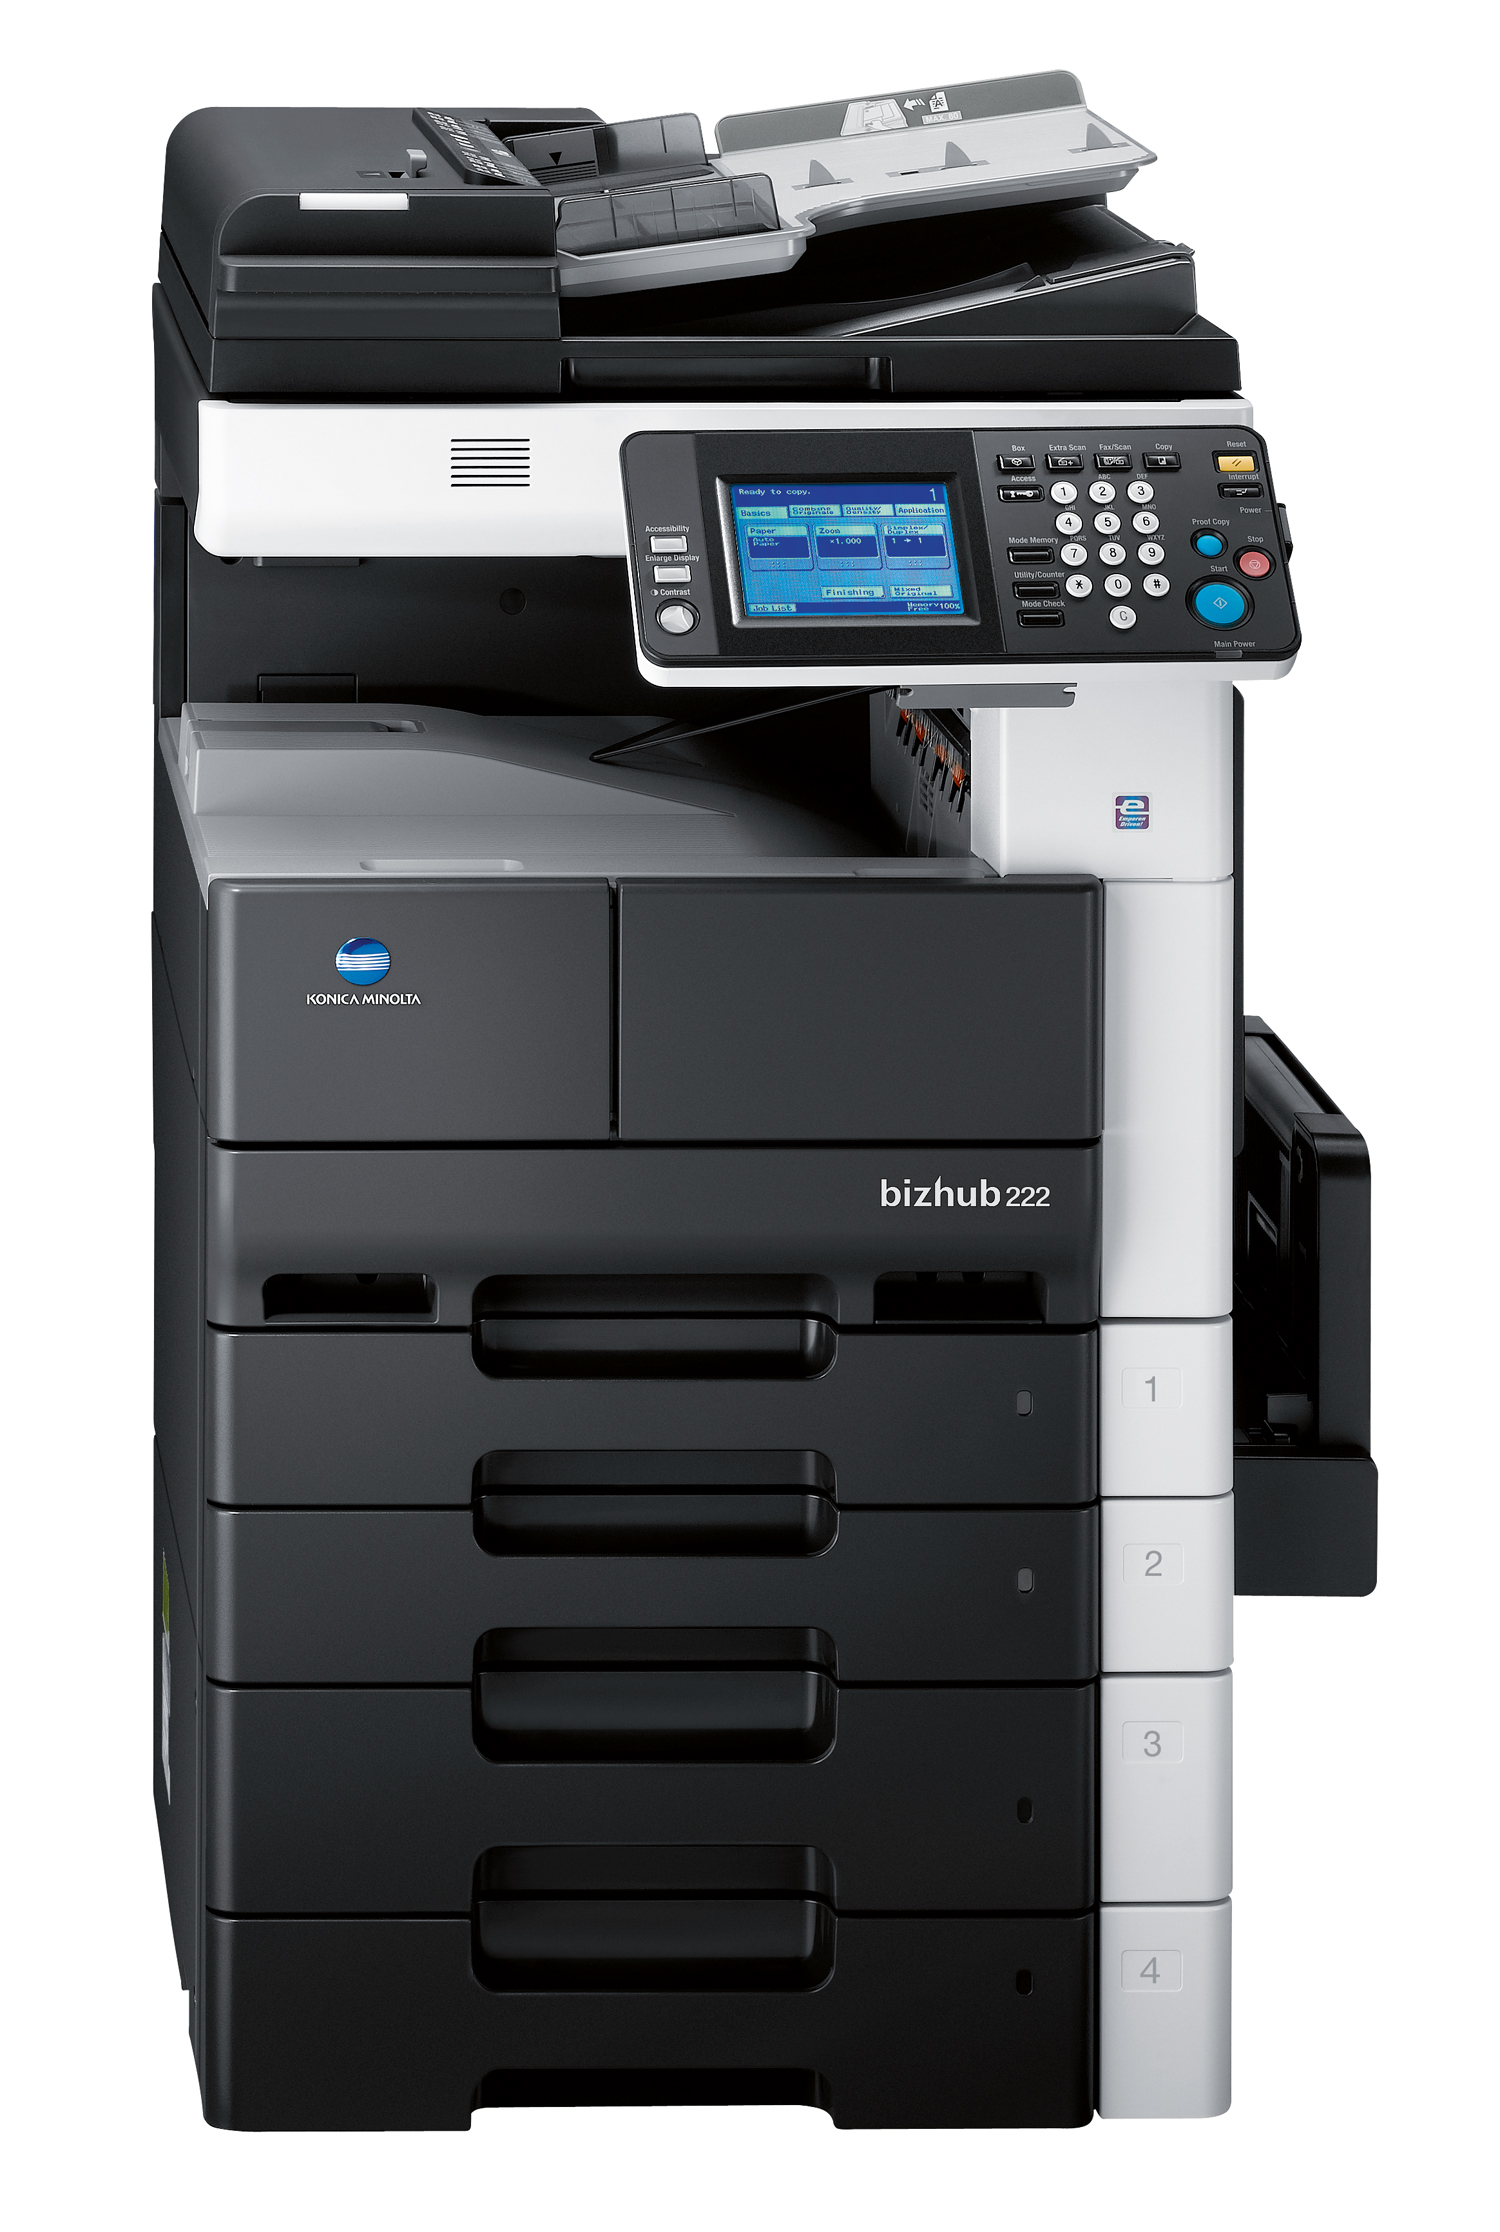 Konica Minolta MFPs Rated Best Overall in Key Customer Study